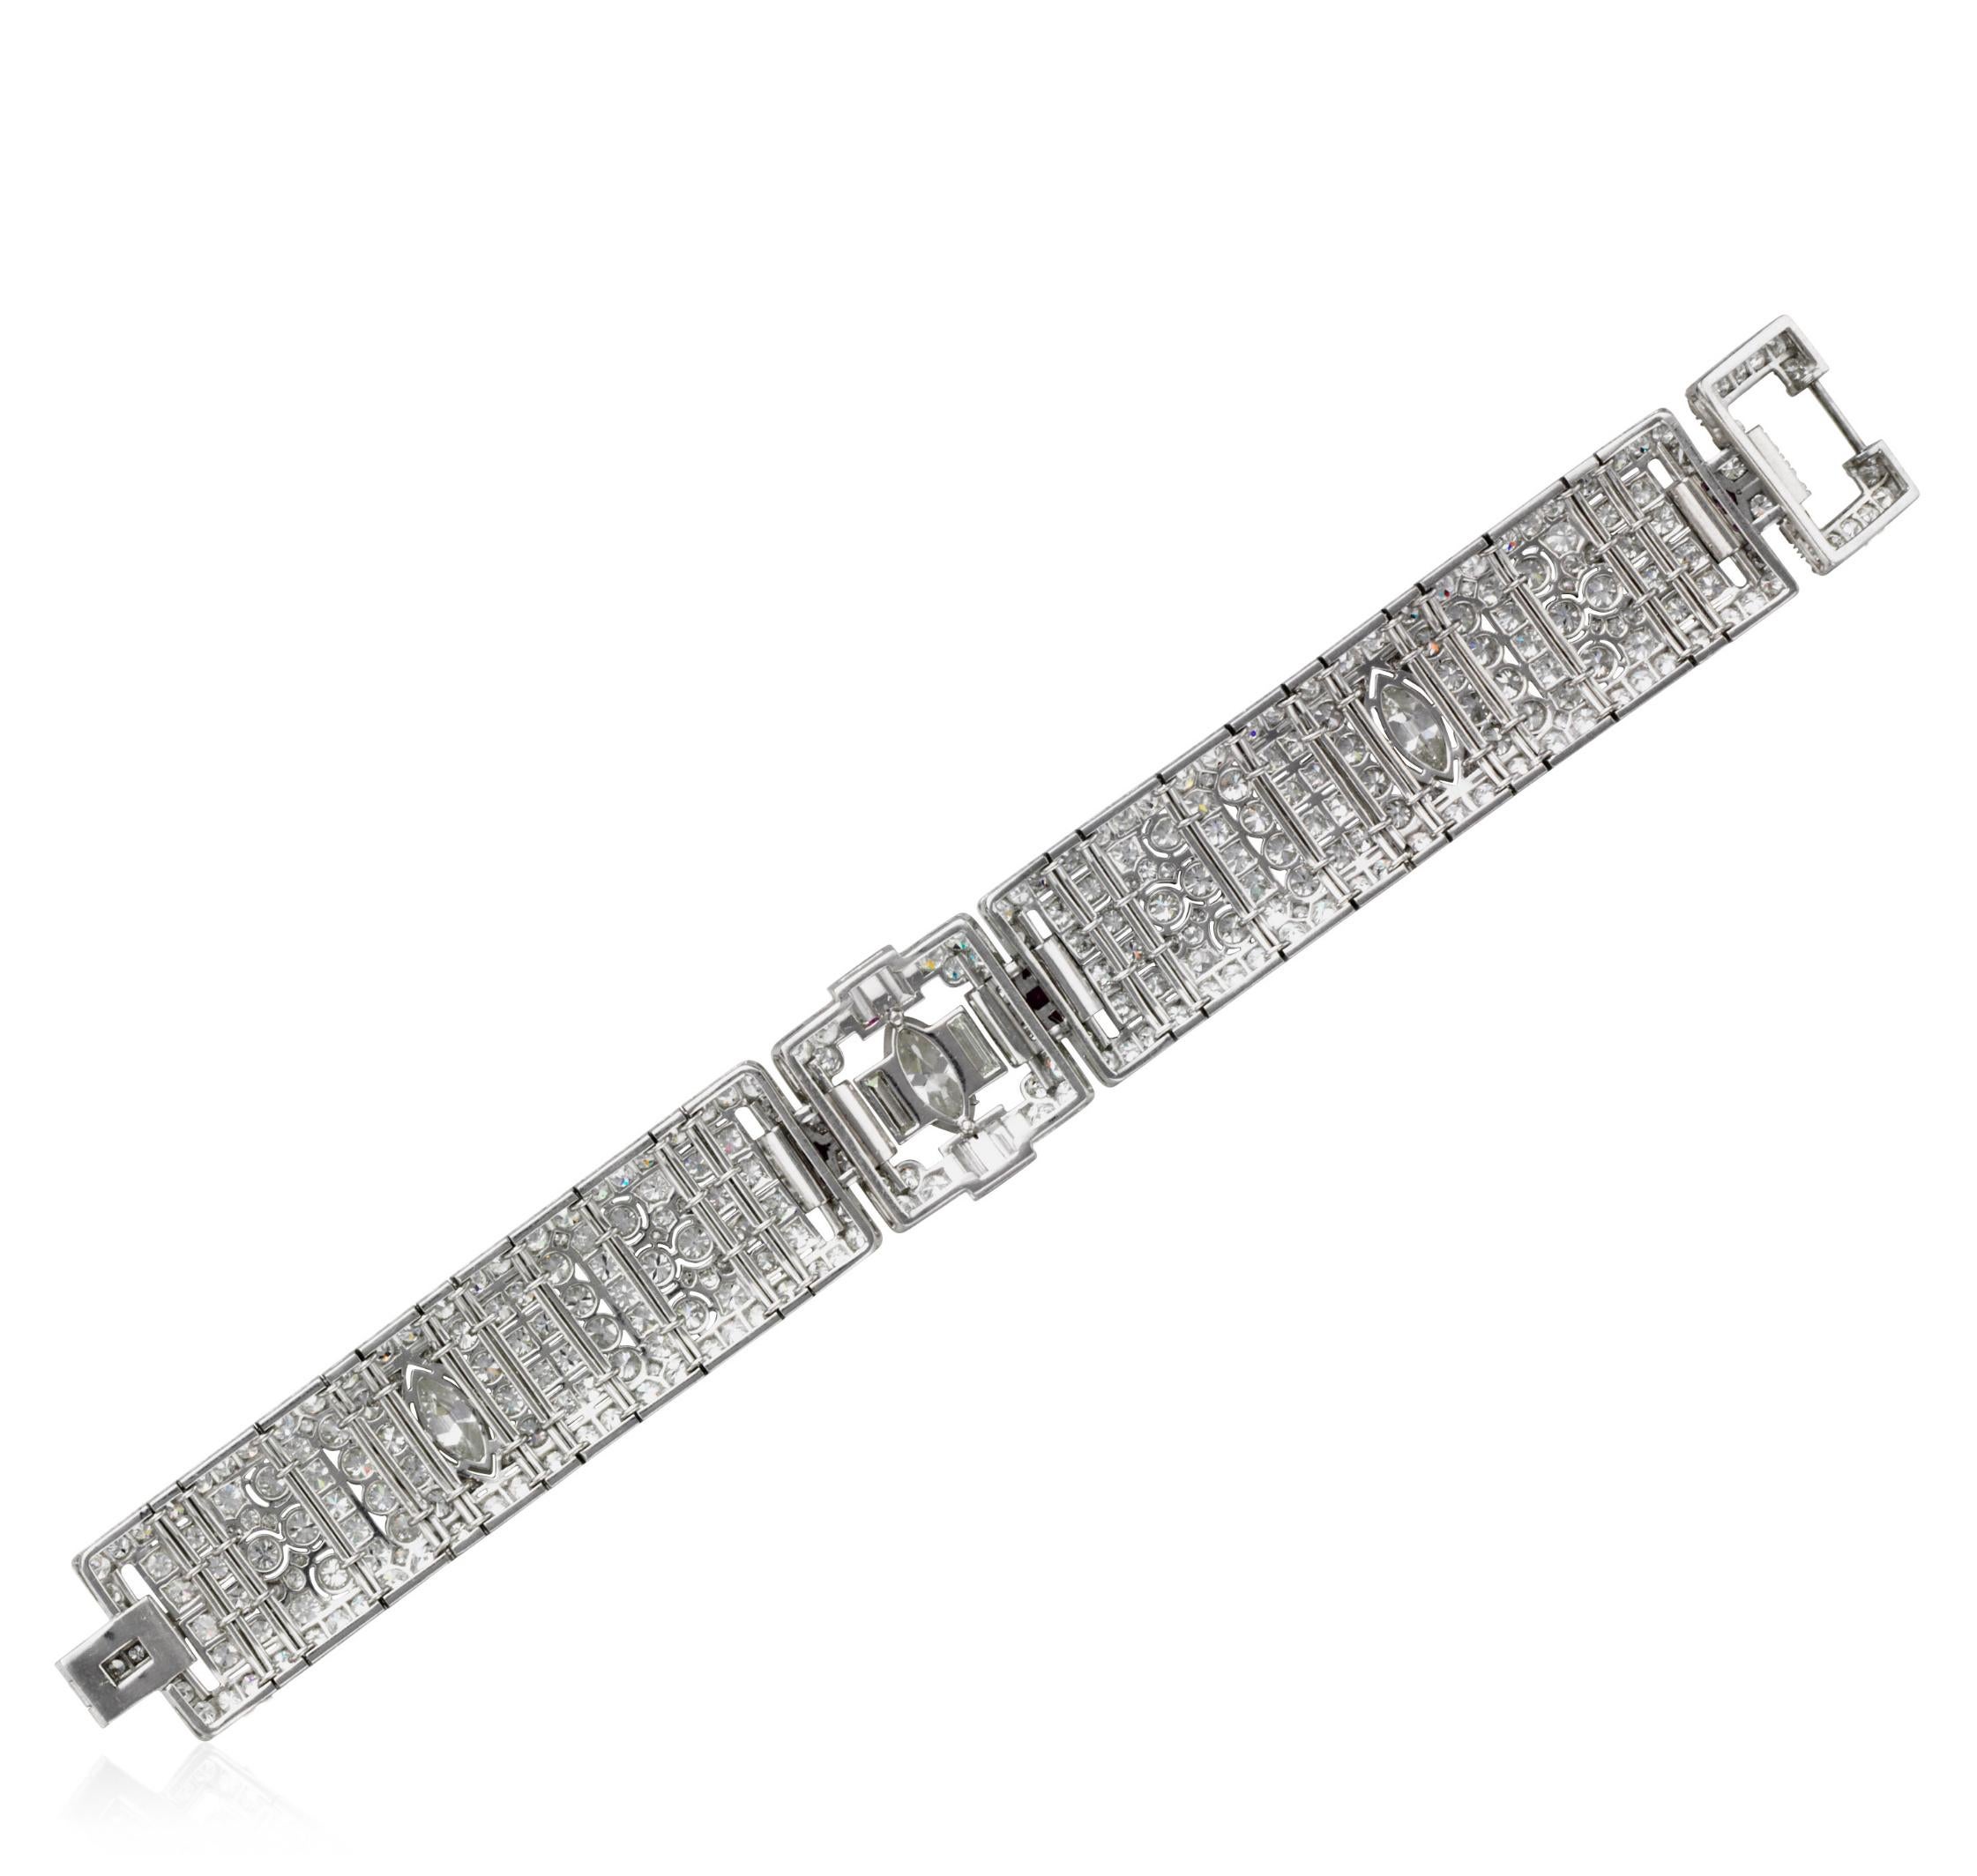 This Platinum Art Deco bracelet is featured with openwork of articulated design.  It is enhanced with 306 round brilliant cuts and 10 single-cut diamonds with an approximate total weight of 11.00 carats, 3 marquise shaped diamonds weighing